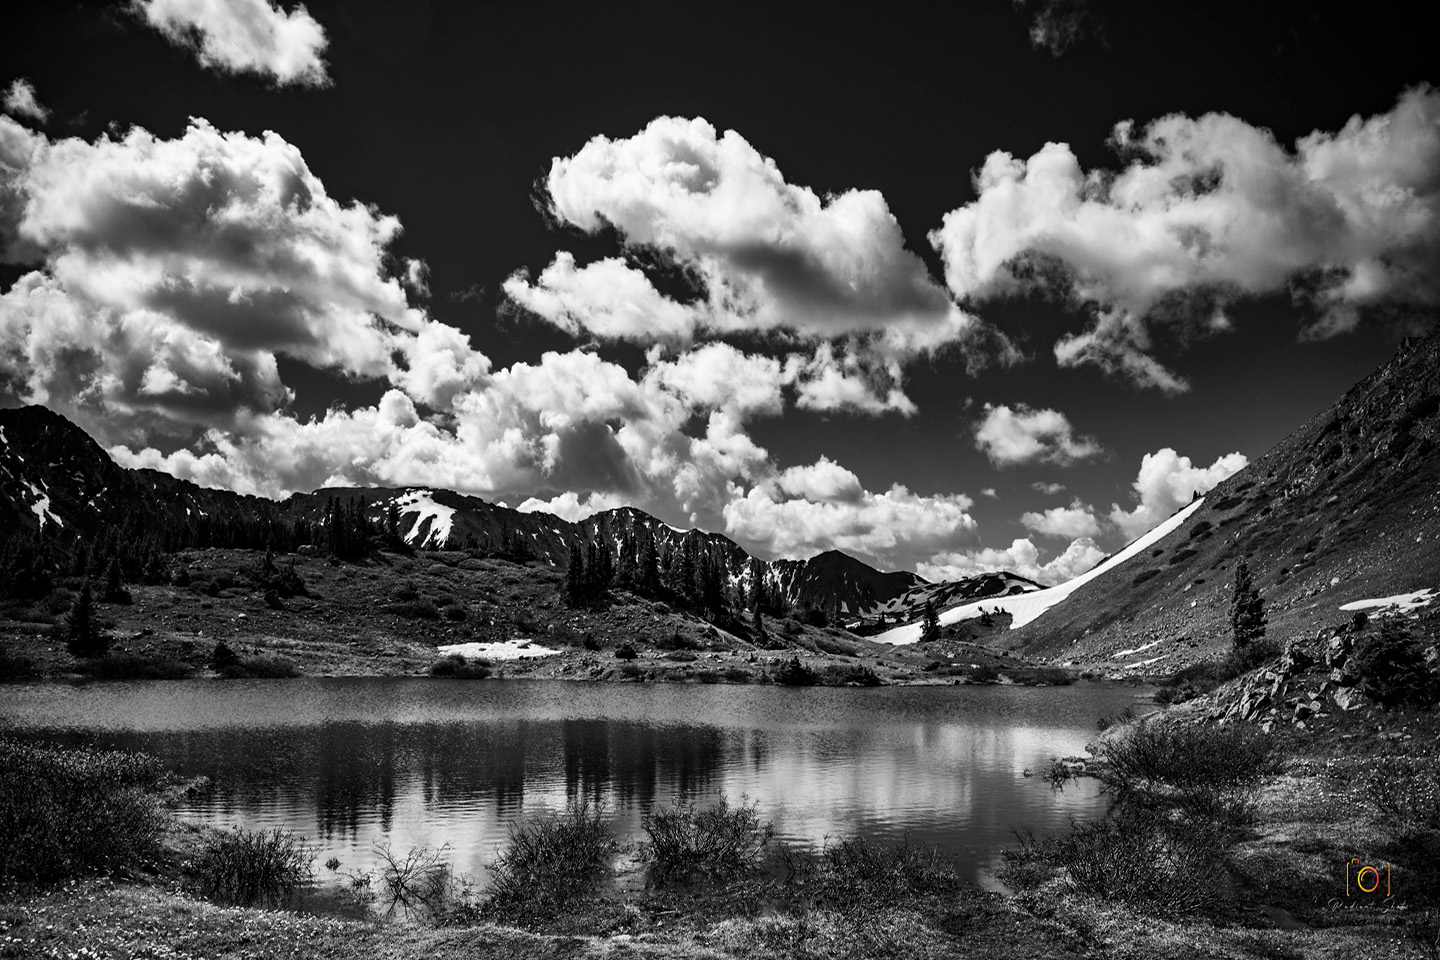 Black and White photograph of a high alpine lake on Loveland Pass with mountains in the background